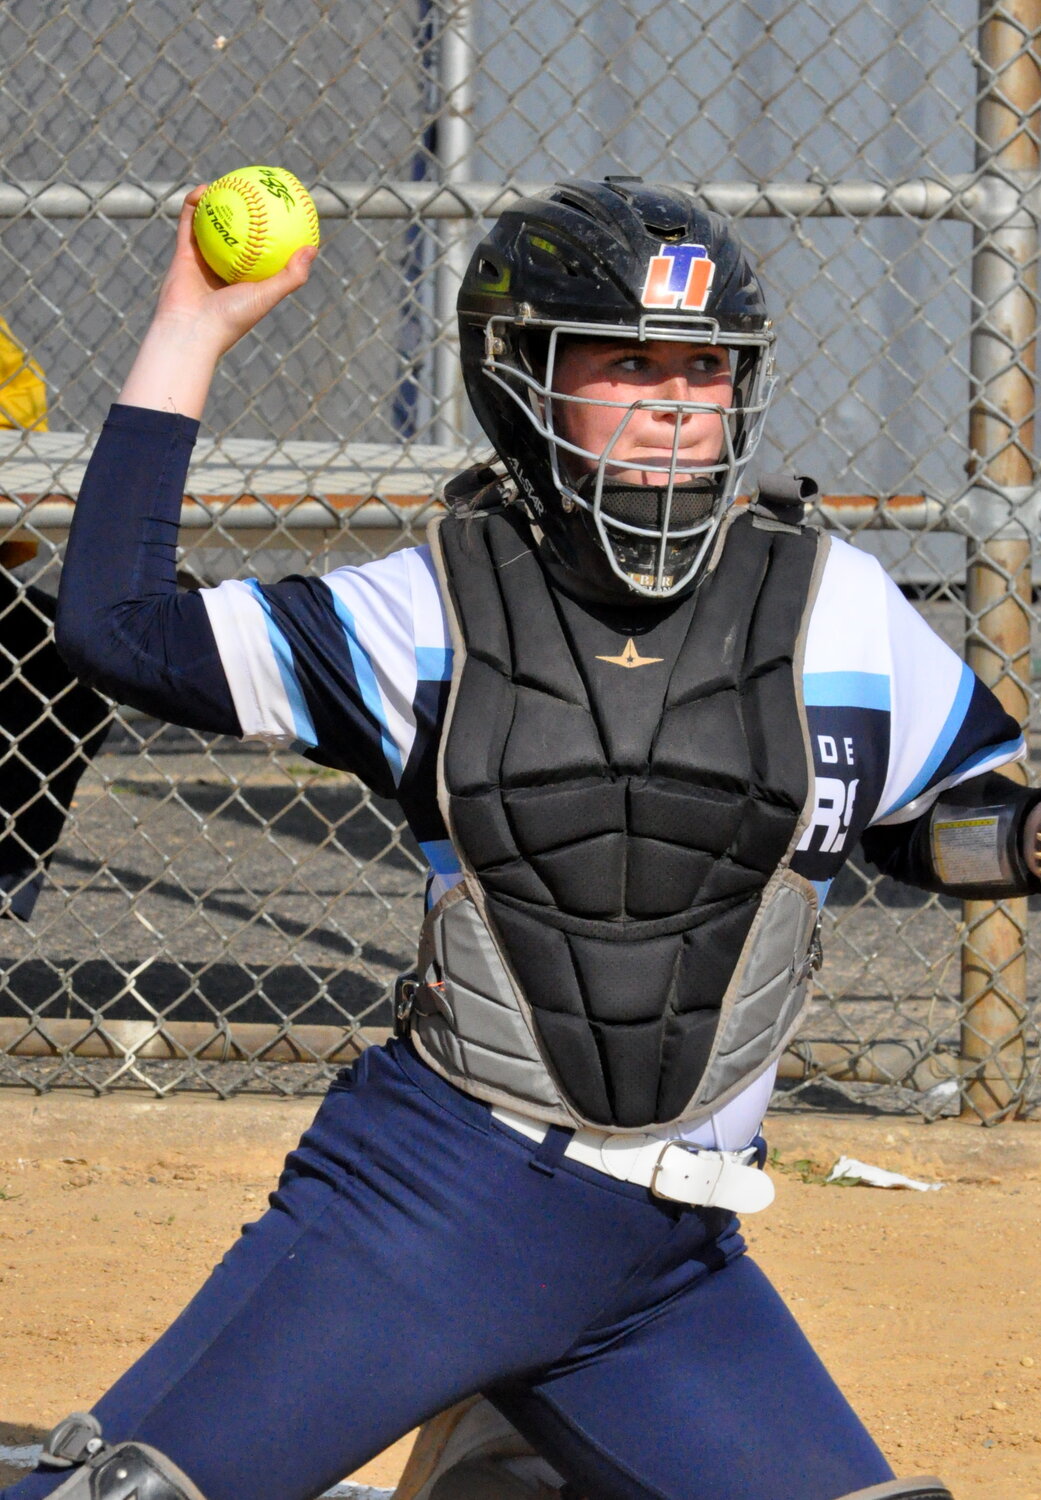 Junior catcher Sophie Nesturrick earned All-County honors for a second consecutive season for the Sailors, who finished 11-10.